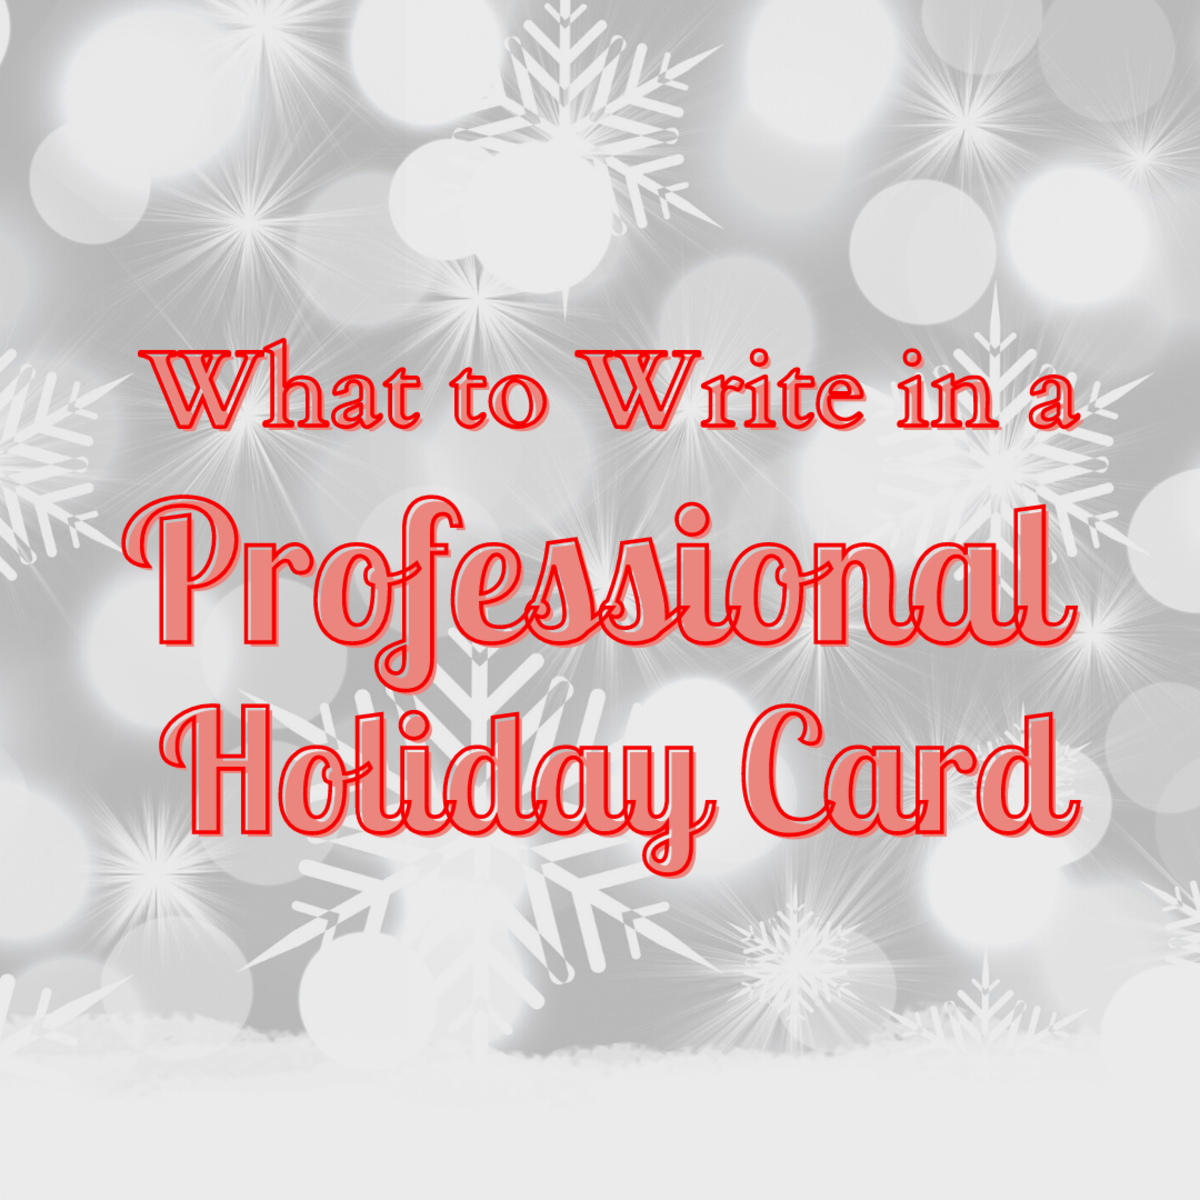 Get inspiration for your professional holiday card!